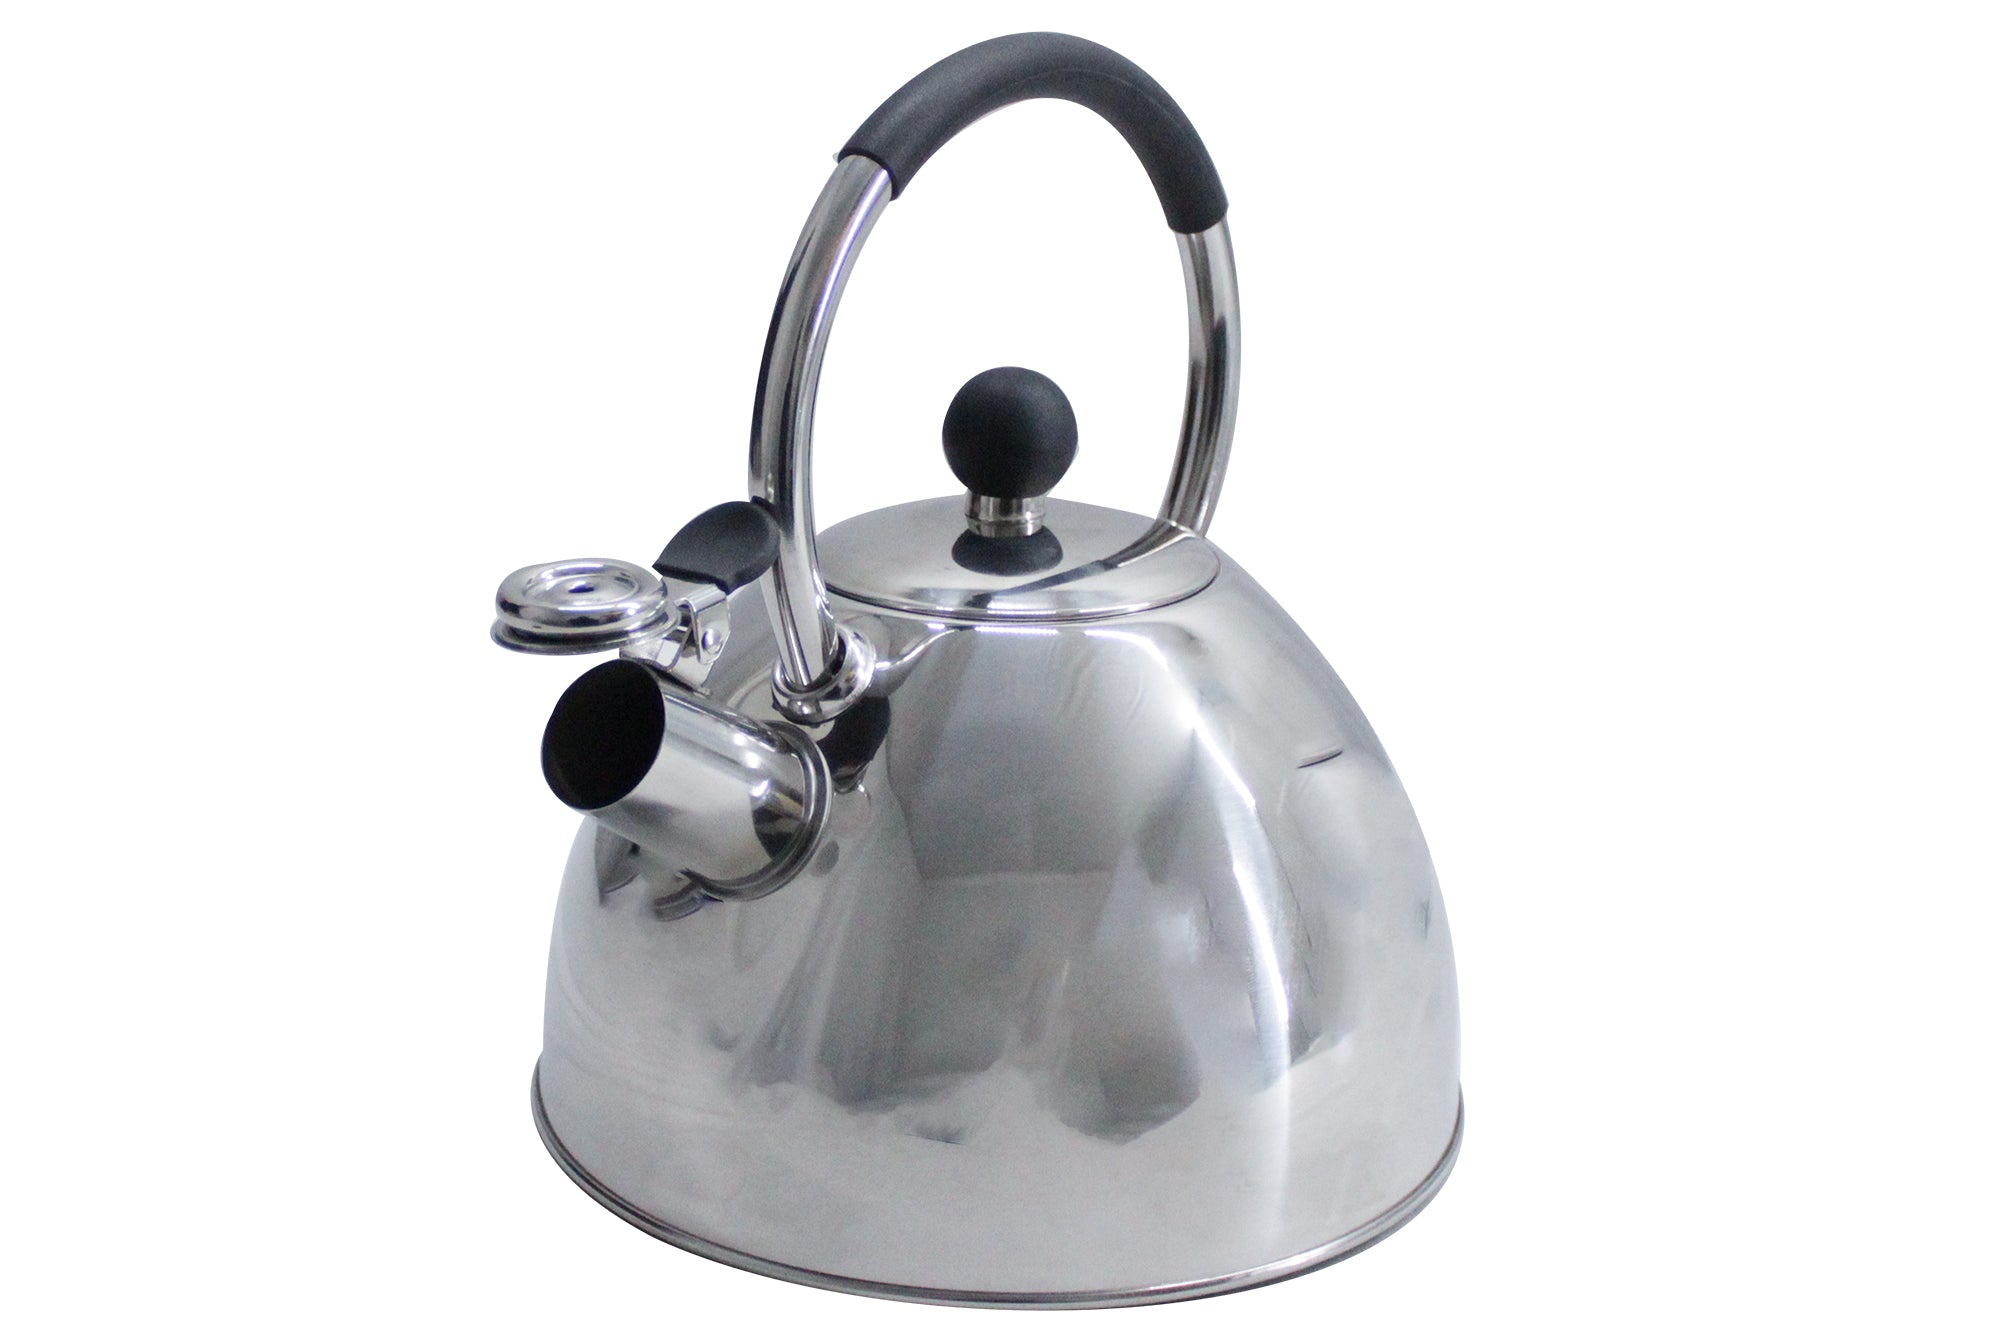 Whistling 3.2L Tea Kettle Stove Top Teapot Stainless Steel Water Boiling